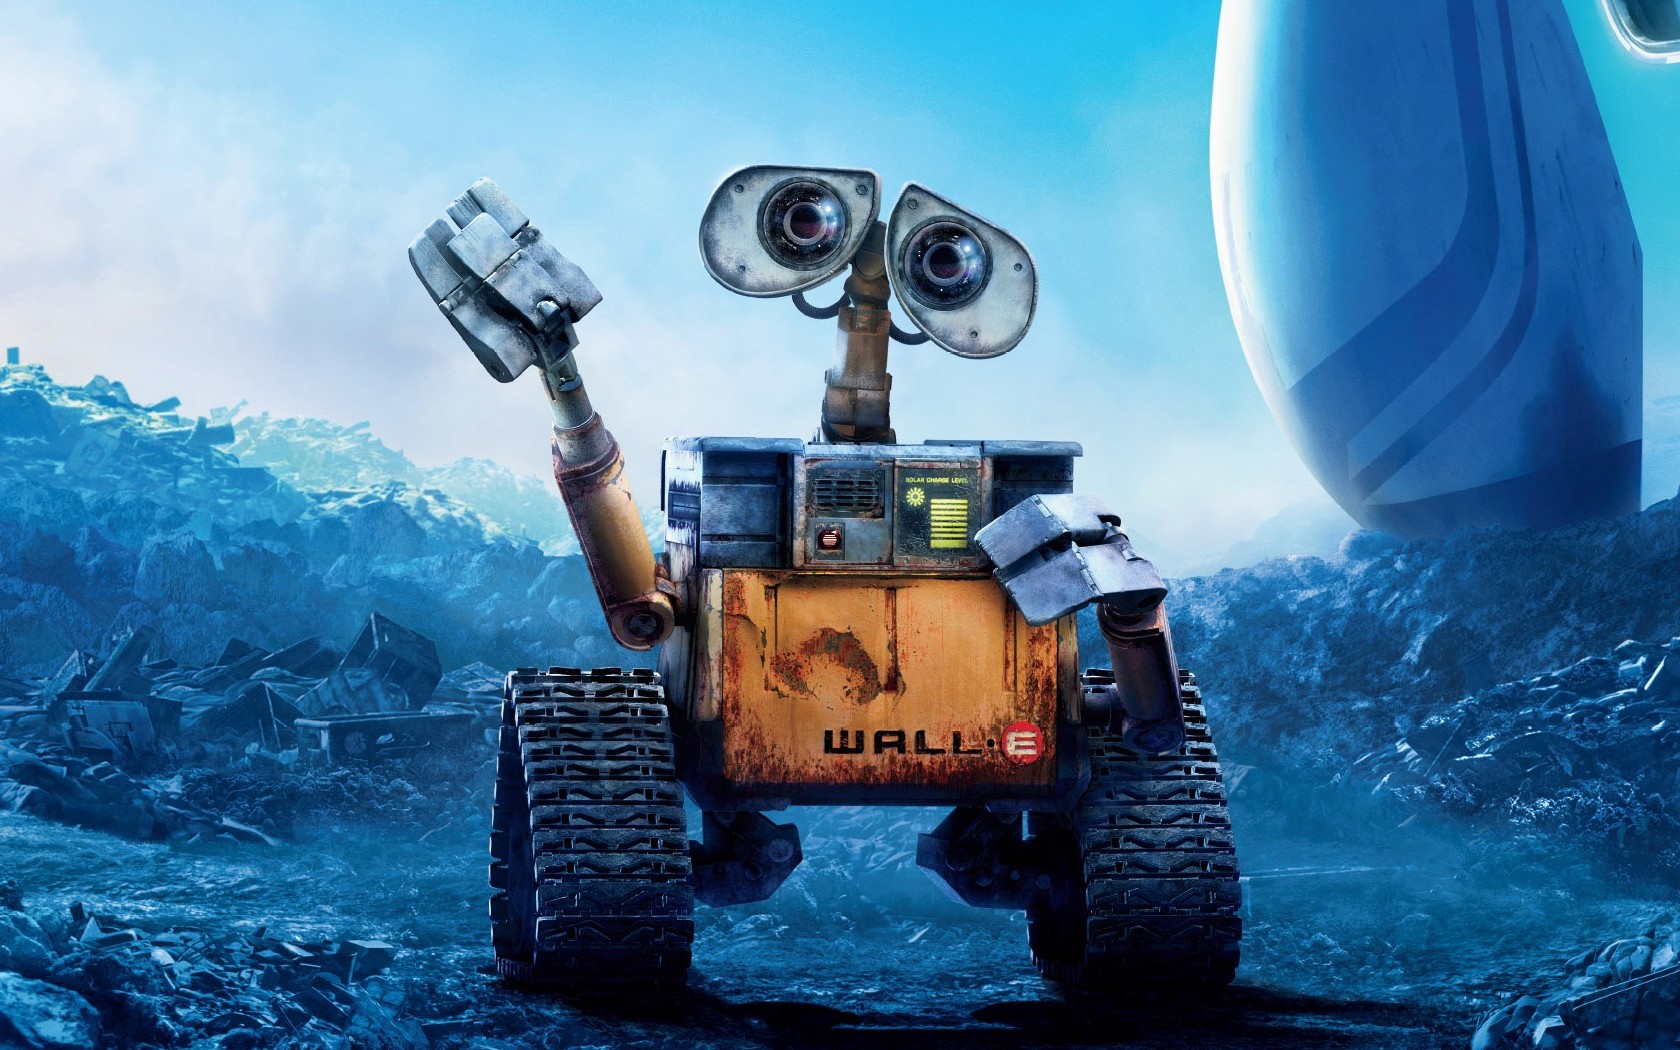 General 1680x1050 WALL-E animation Pixar Animation Studios robot science fiction movie characters